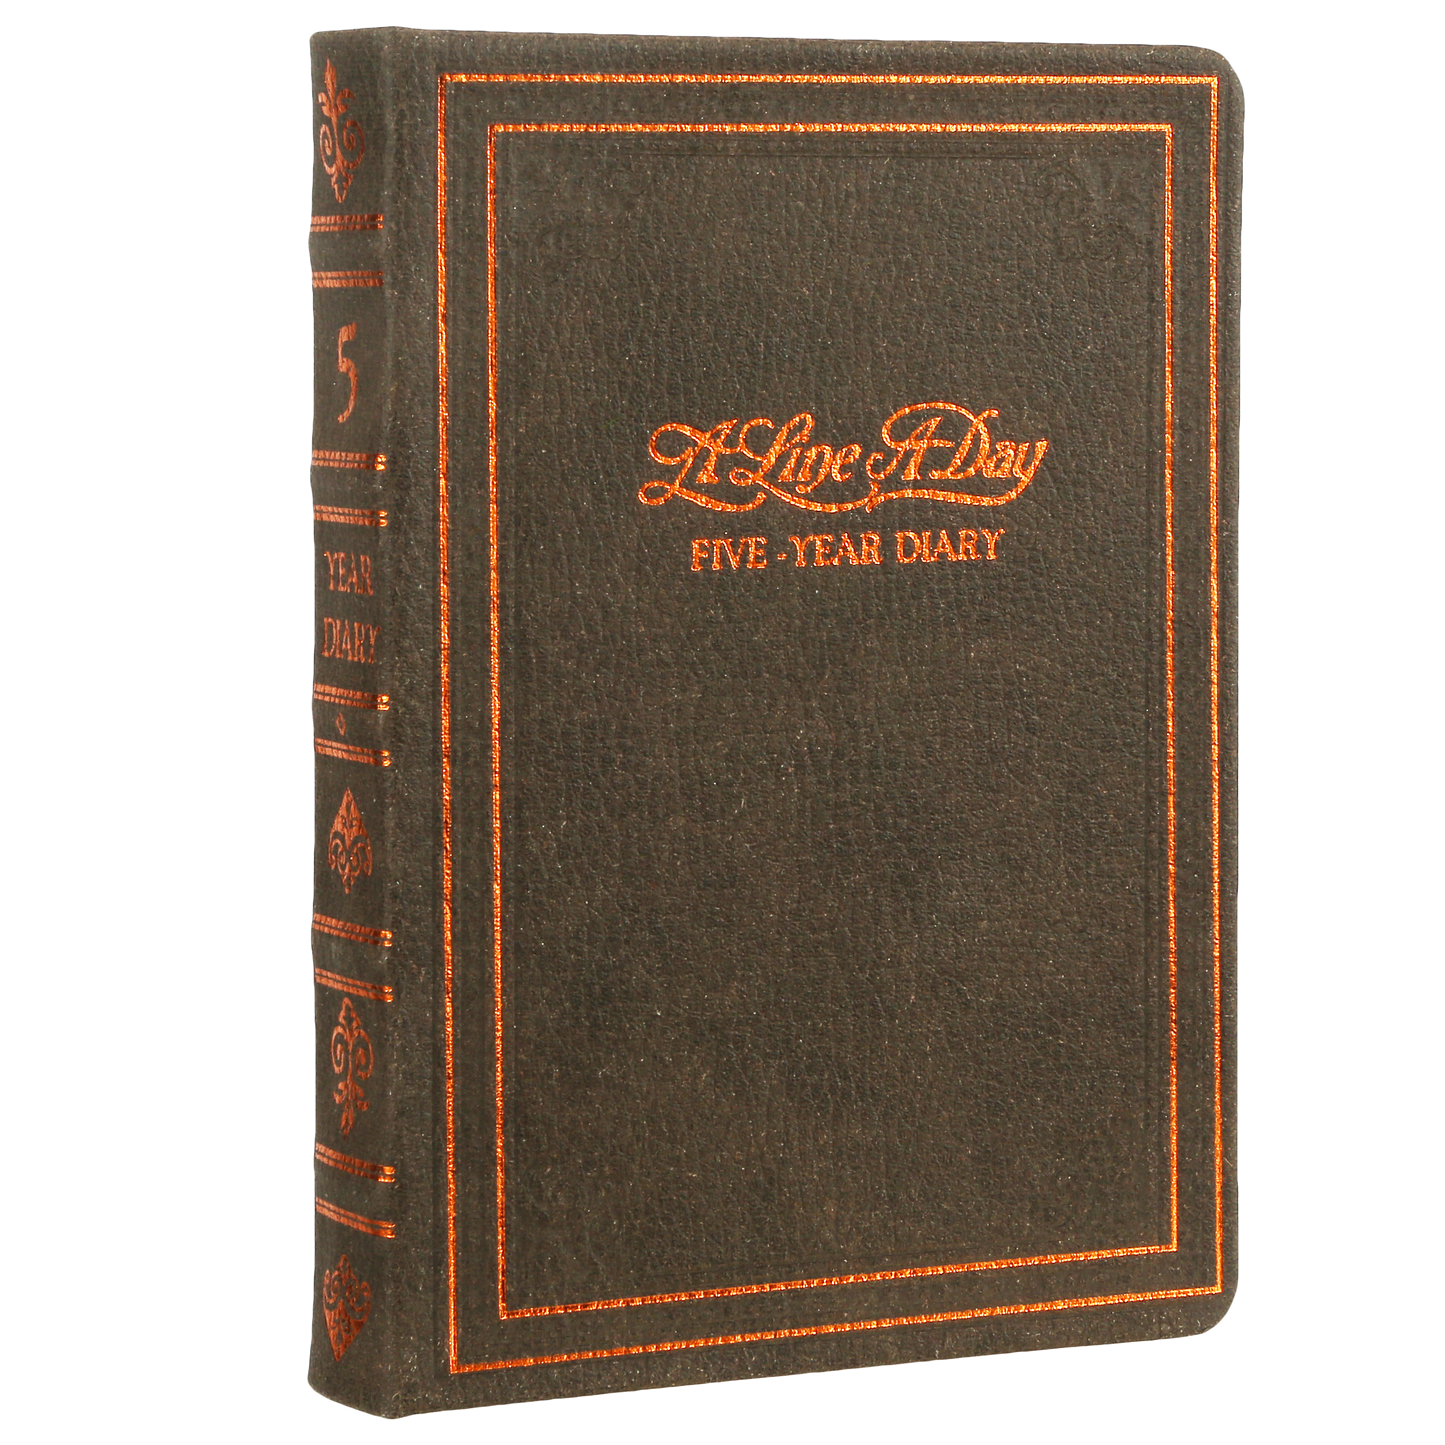 A Line a Day - 5 Year Recycled Leather Diary, Vintage Looking for Girls, Women and Men, 4.64x6.6" 394p. (Dark Brown)